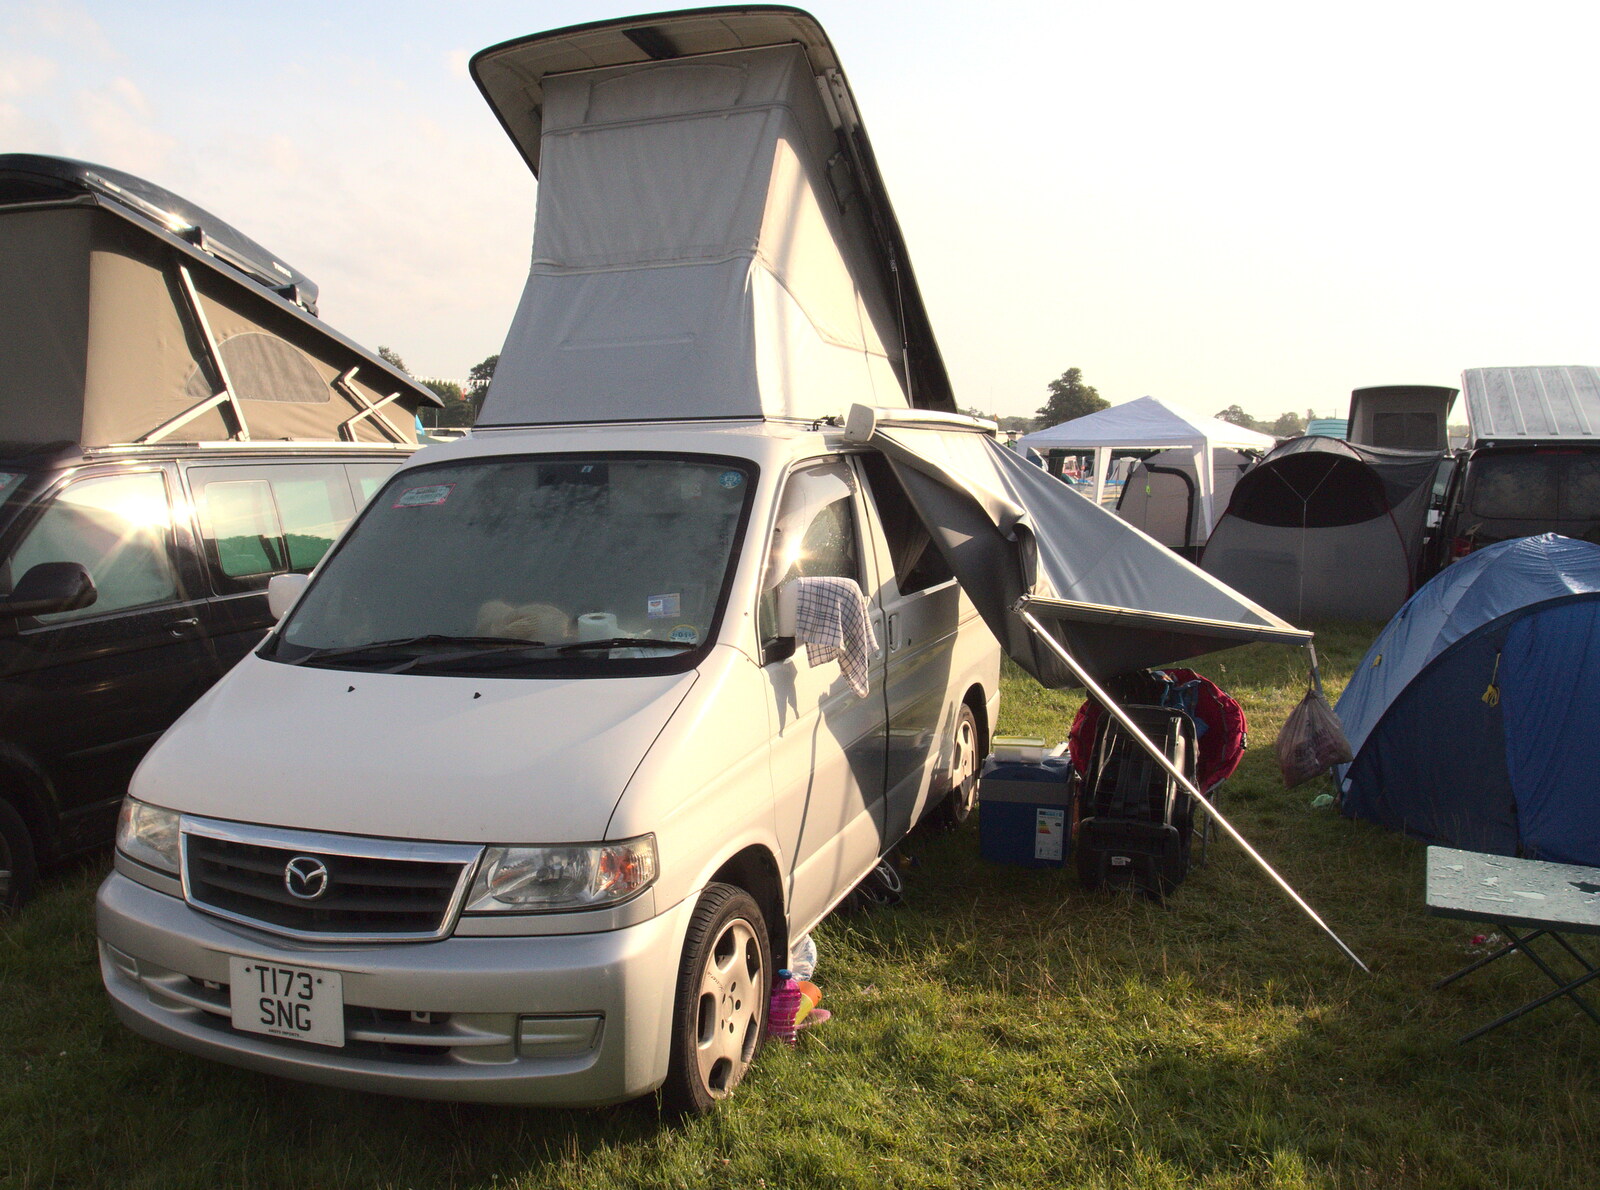 An awning is the casualty of heavy overnight rain from Latitude Festival, Henham Park, Southwold, Suffolk - 17th July 2014